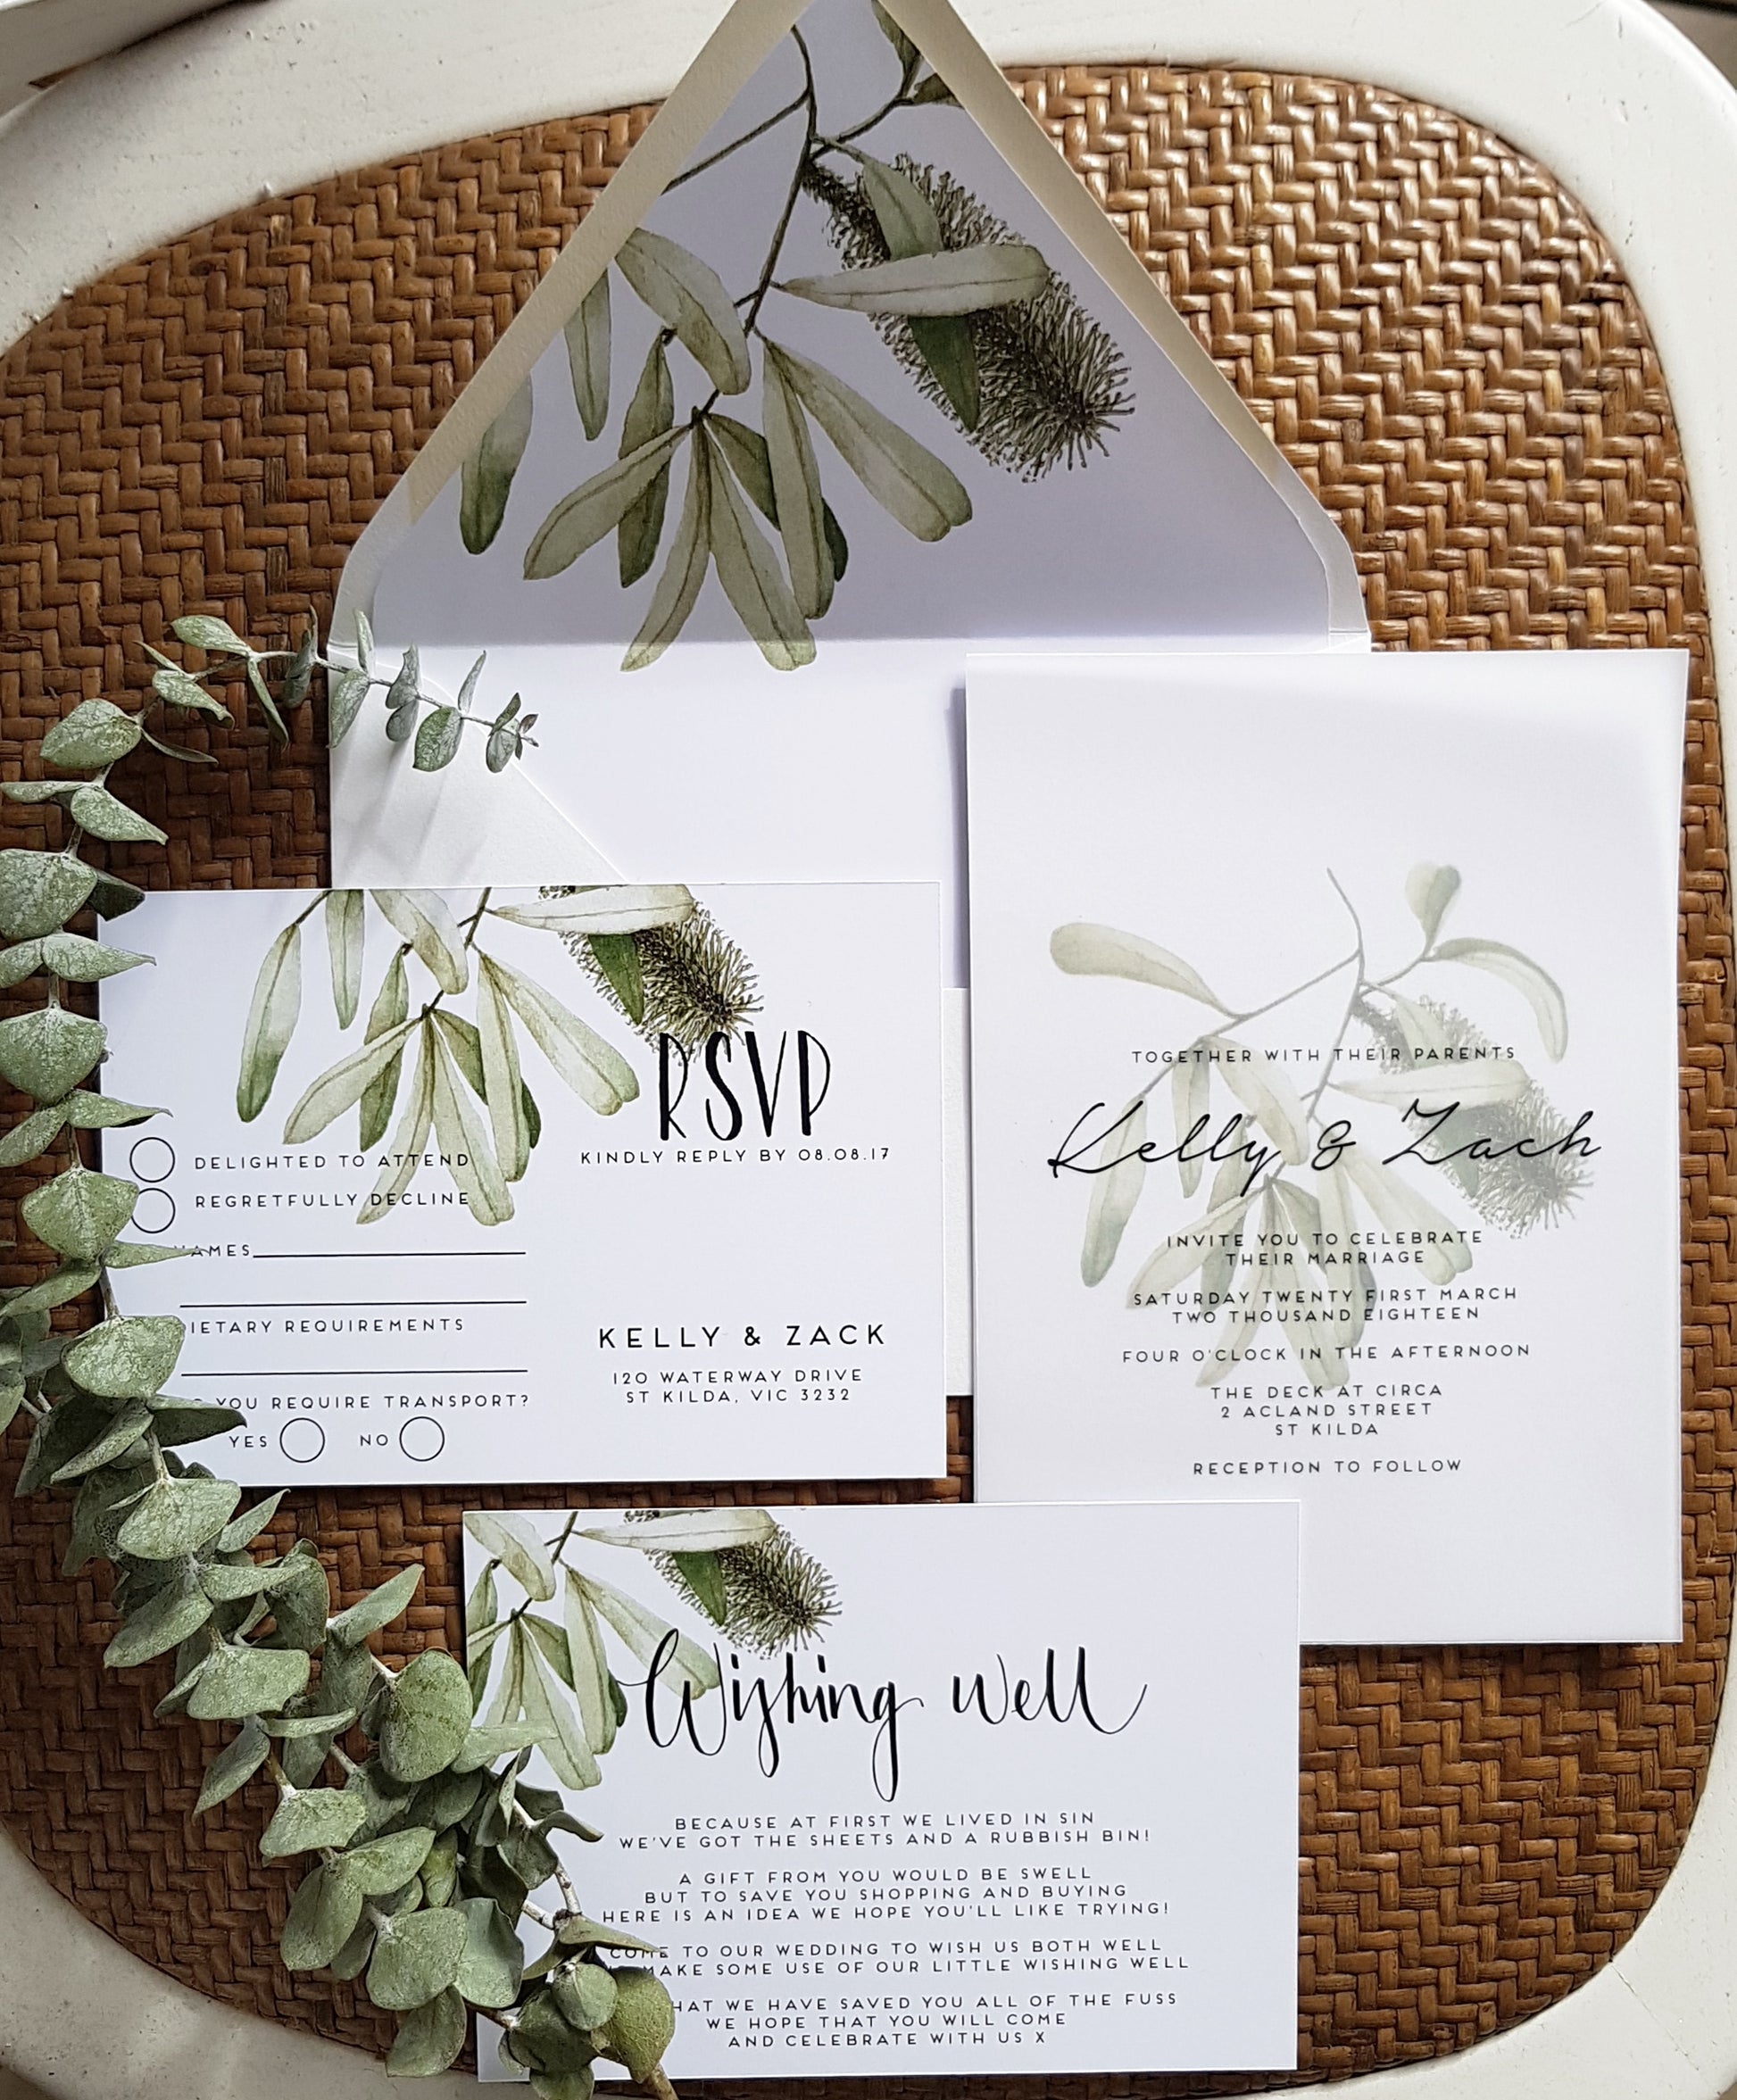 Banksia wedding invite set, including invite, rsvp card, wishing well card and envelope with liner all featuring the banksia design